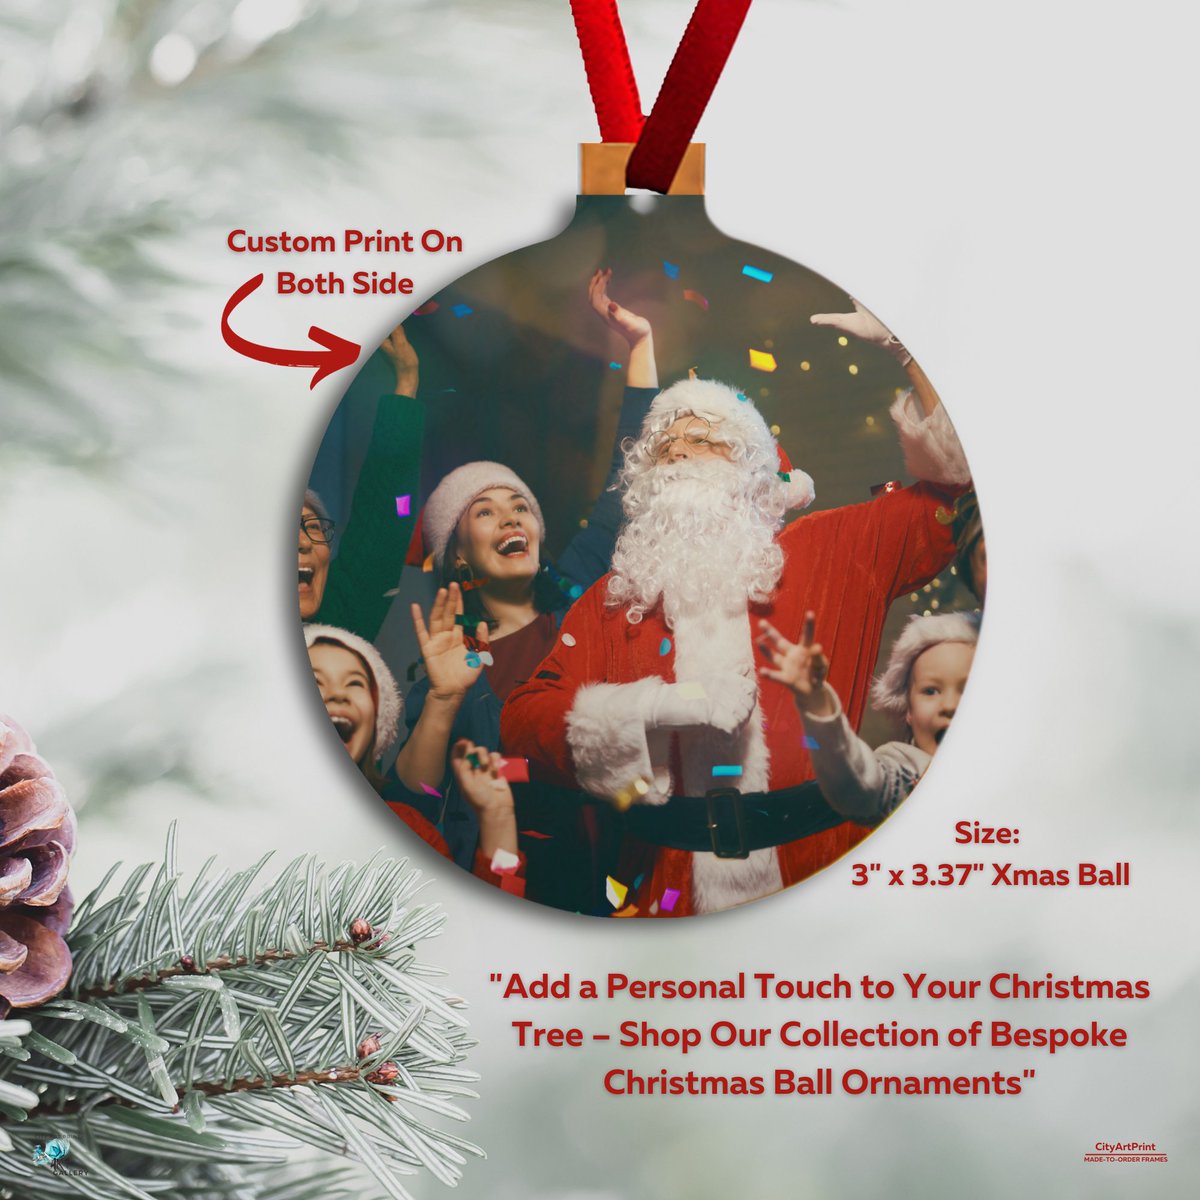 Add a Personal Touch to Your Christmas Tree – Shop Our Collection of Bespoke Christmas Ball Ornaments. #ChristmasDecor #PersonalizedOrnaments #BespokeChristmas #TreeOrnaments #Holiday #CustomizedDecorations #DeckTheHalls #FestiveHome #UniqueChristmas 

cityartprint.etsy.com/in-en/listing/…